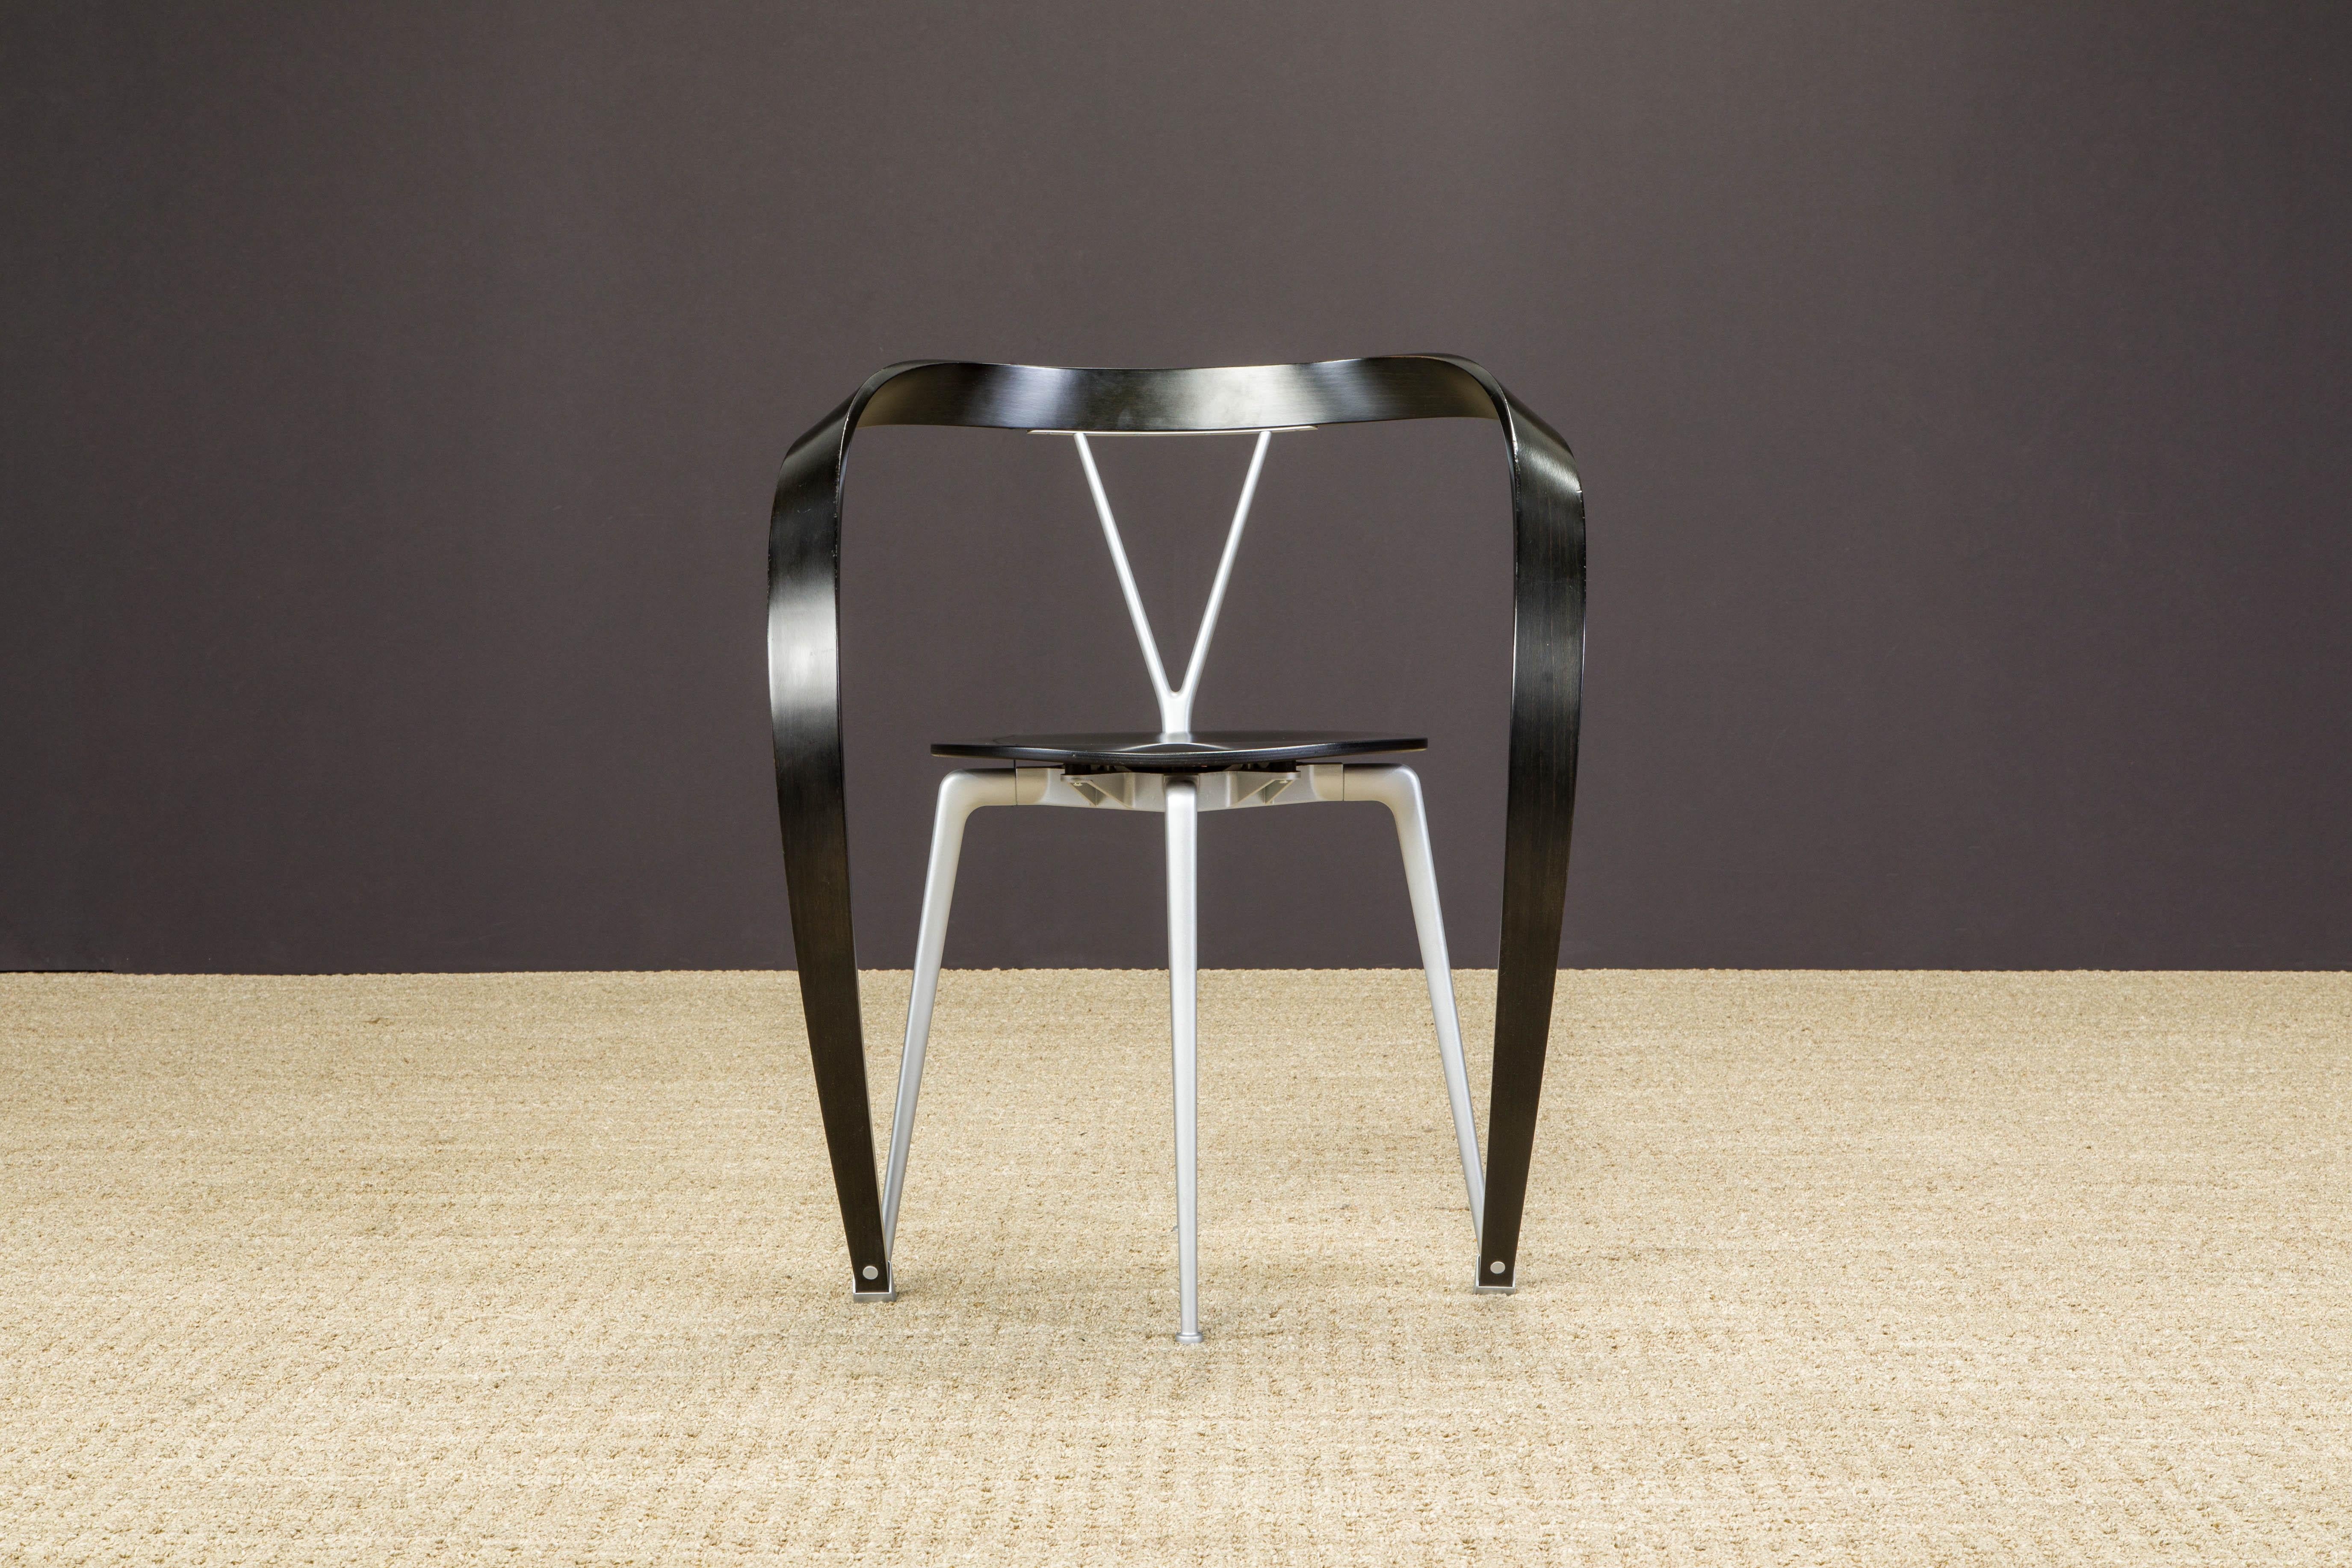 Metal Andrea Branzi 'Revers' Post-Modern Chairs for Cassina, 1993, Set of Six, Signed For Sale